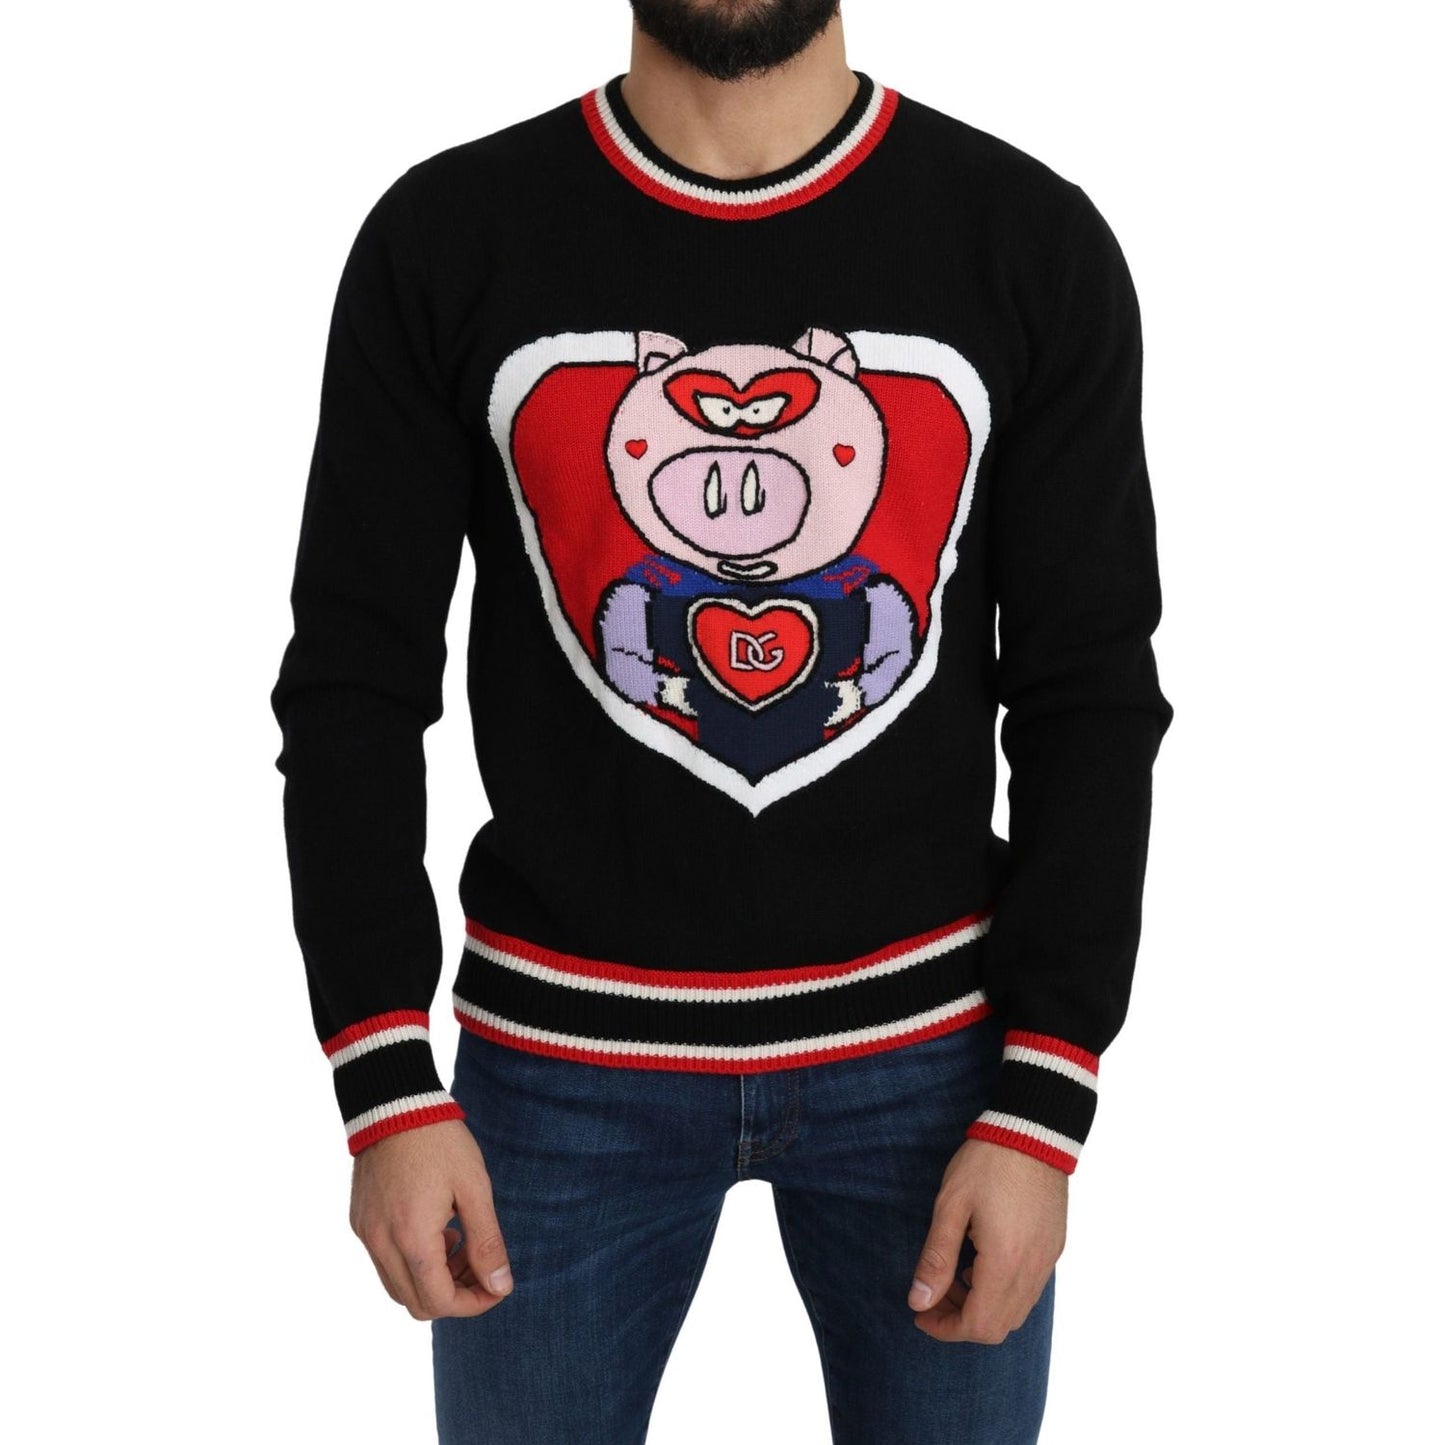 Dolce & Gabbana Elegant Black Cashmere Crew Neck Sweater black-cashmere-pig-of-the-year-pullover-sweater IMG_4380-scaled-a413b8fc-d12.jpg